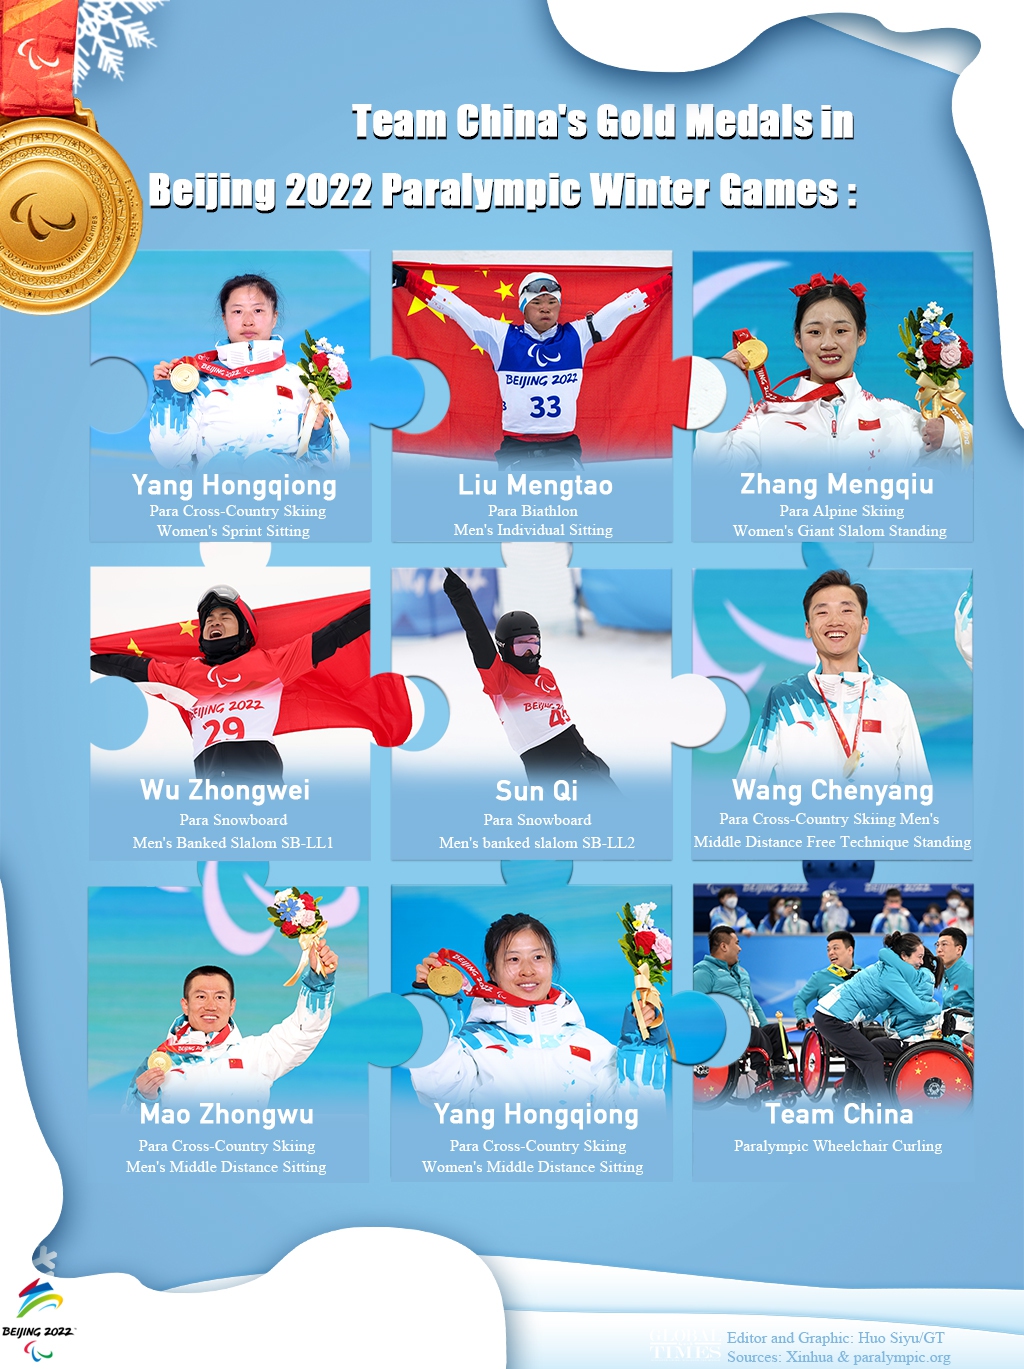 Team China's Gold Medals in Beijing 2022 Paralympic Winter Games. Graphic: Huo Siyu/GT